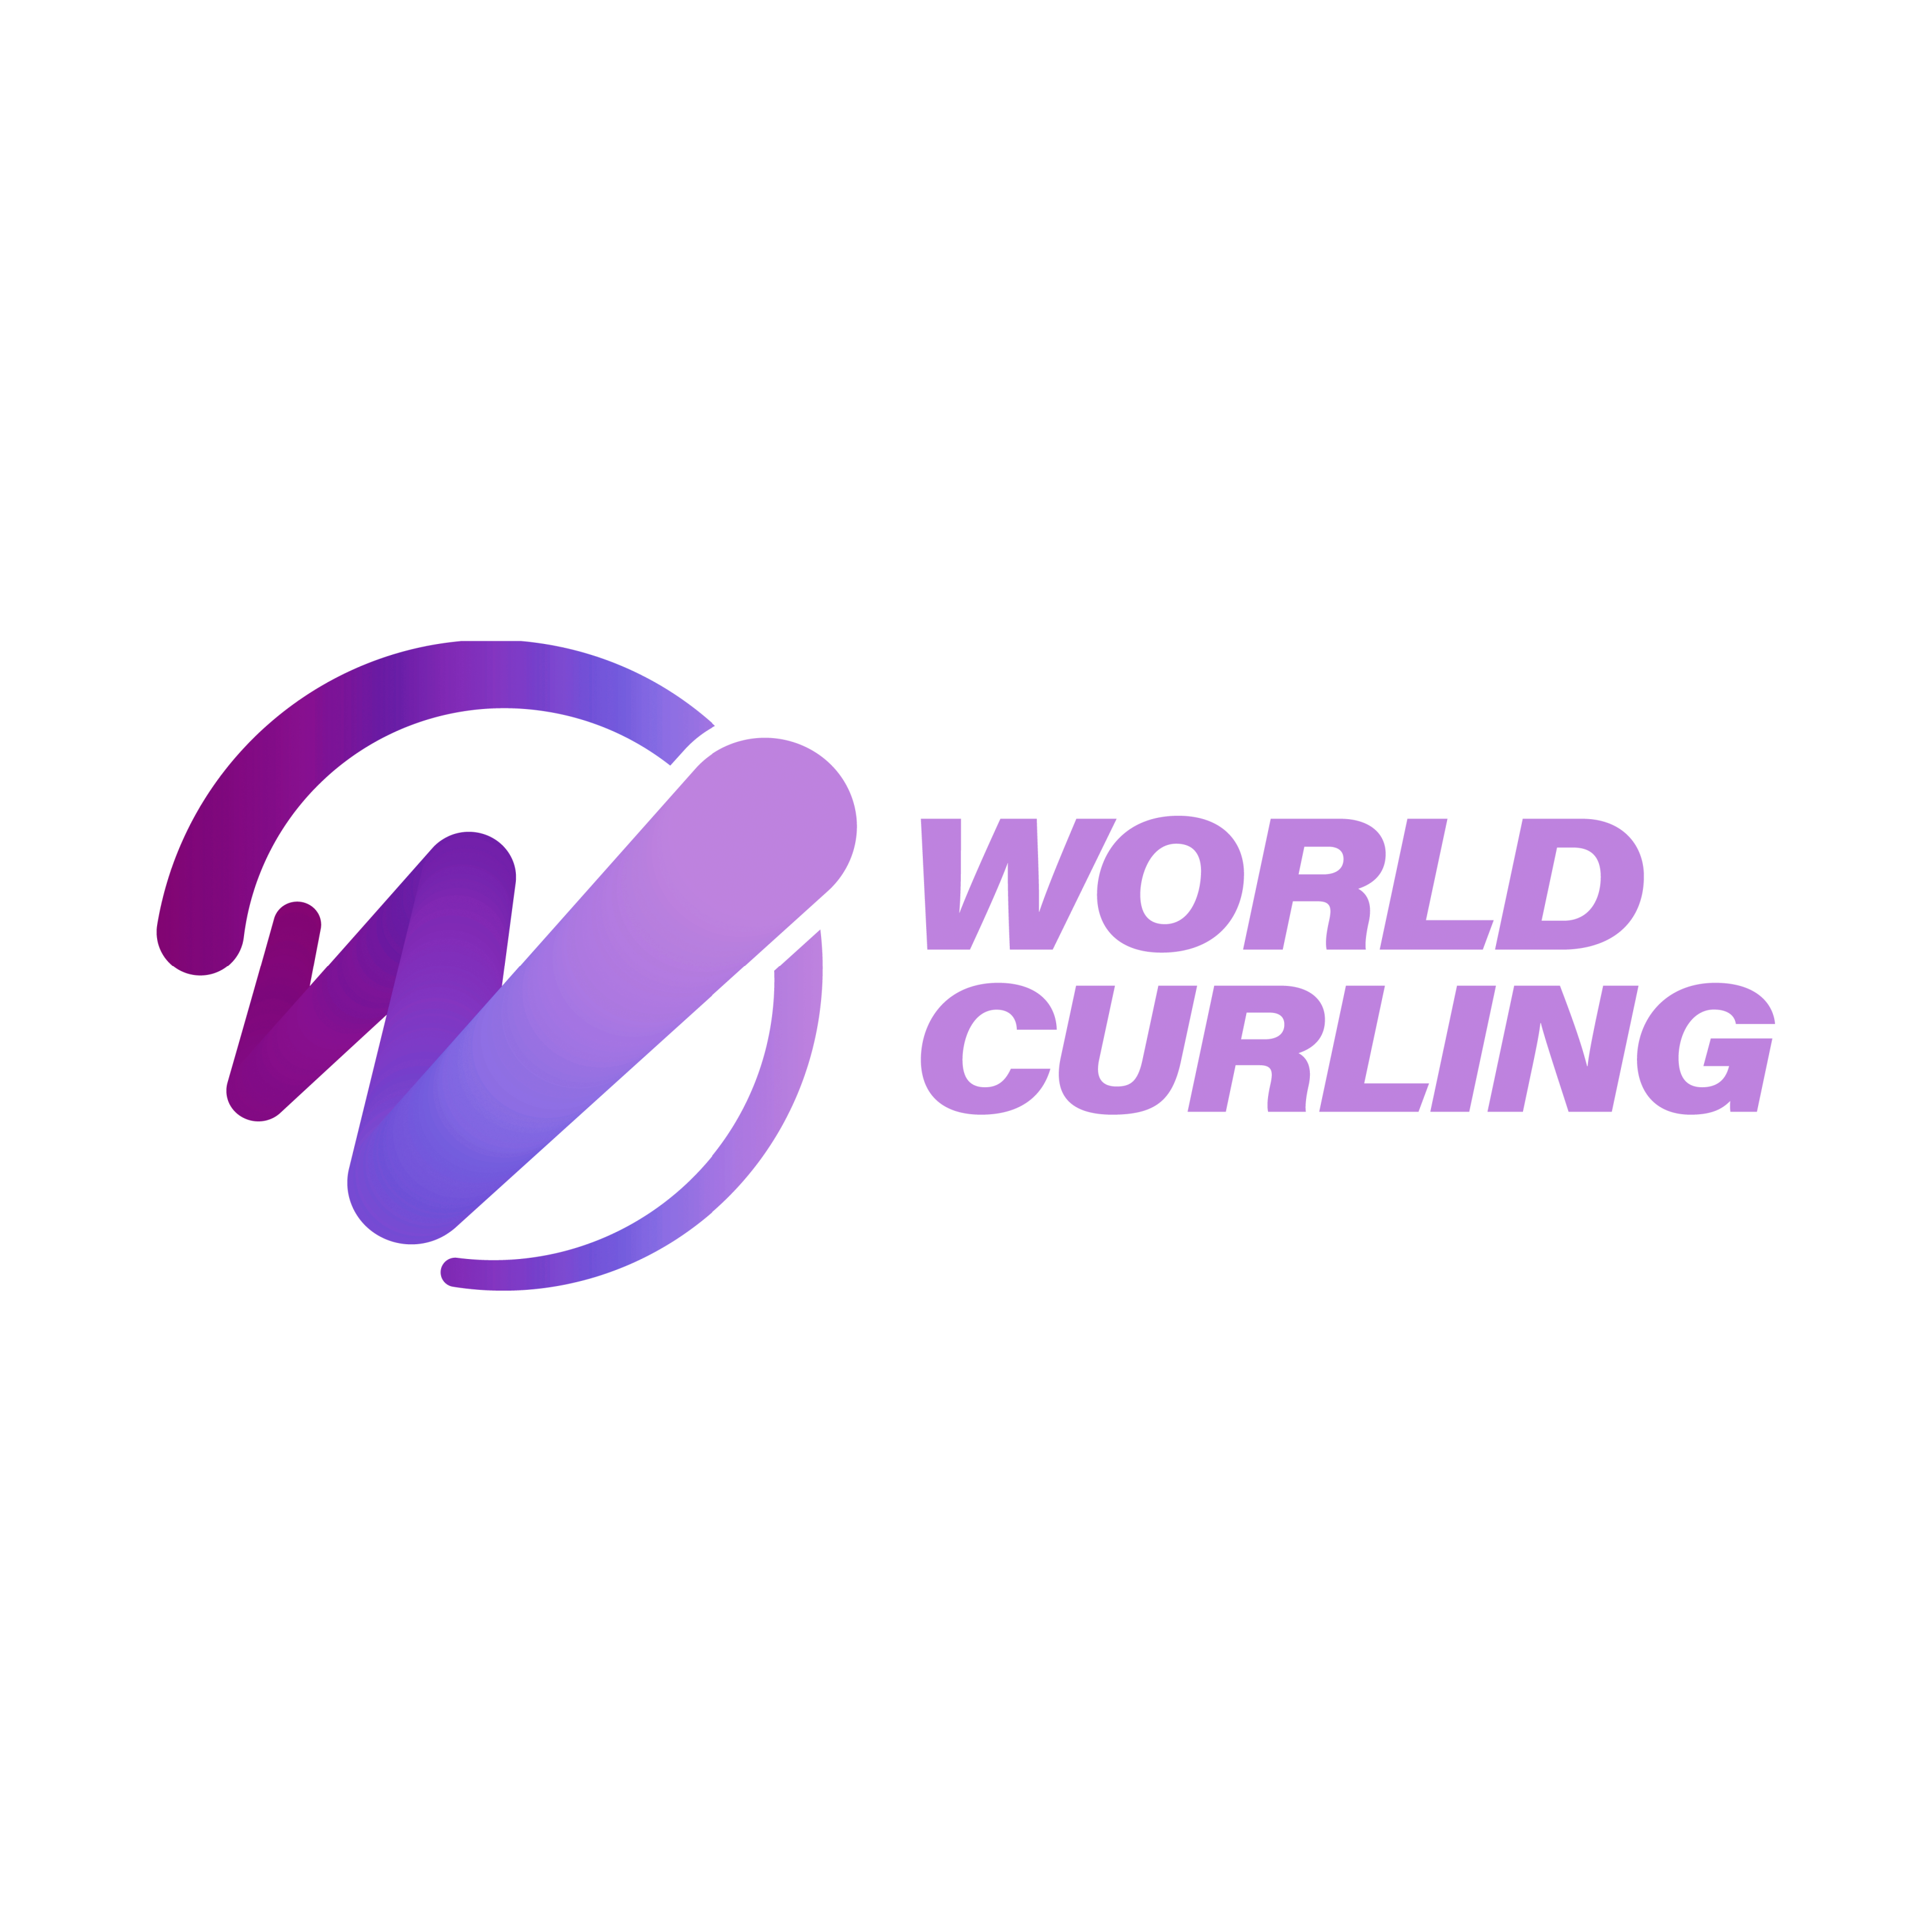 World Curling  Transparent Gallery